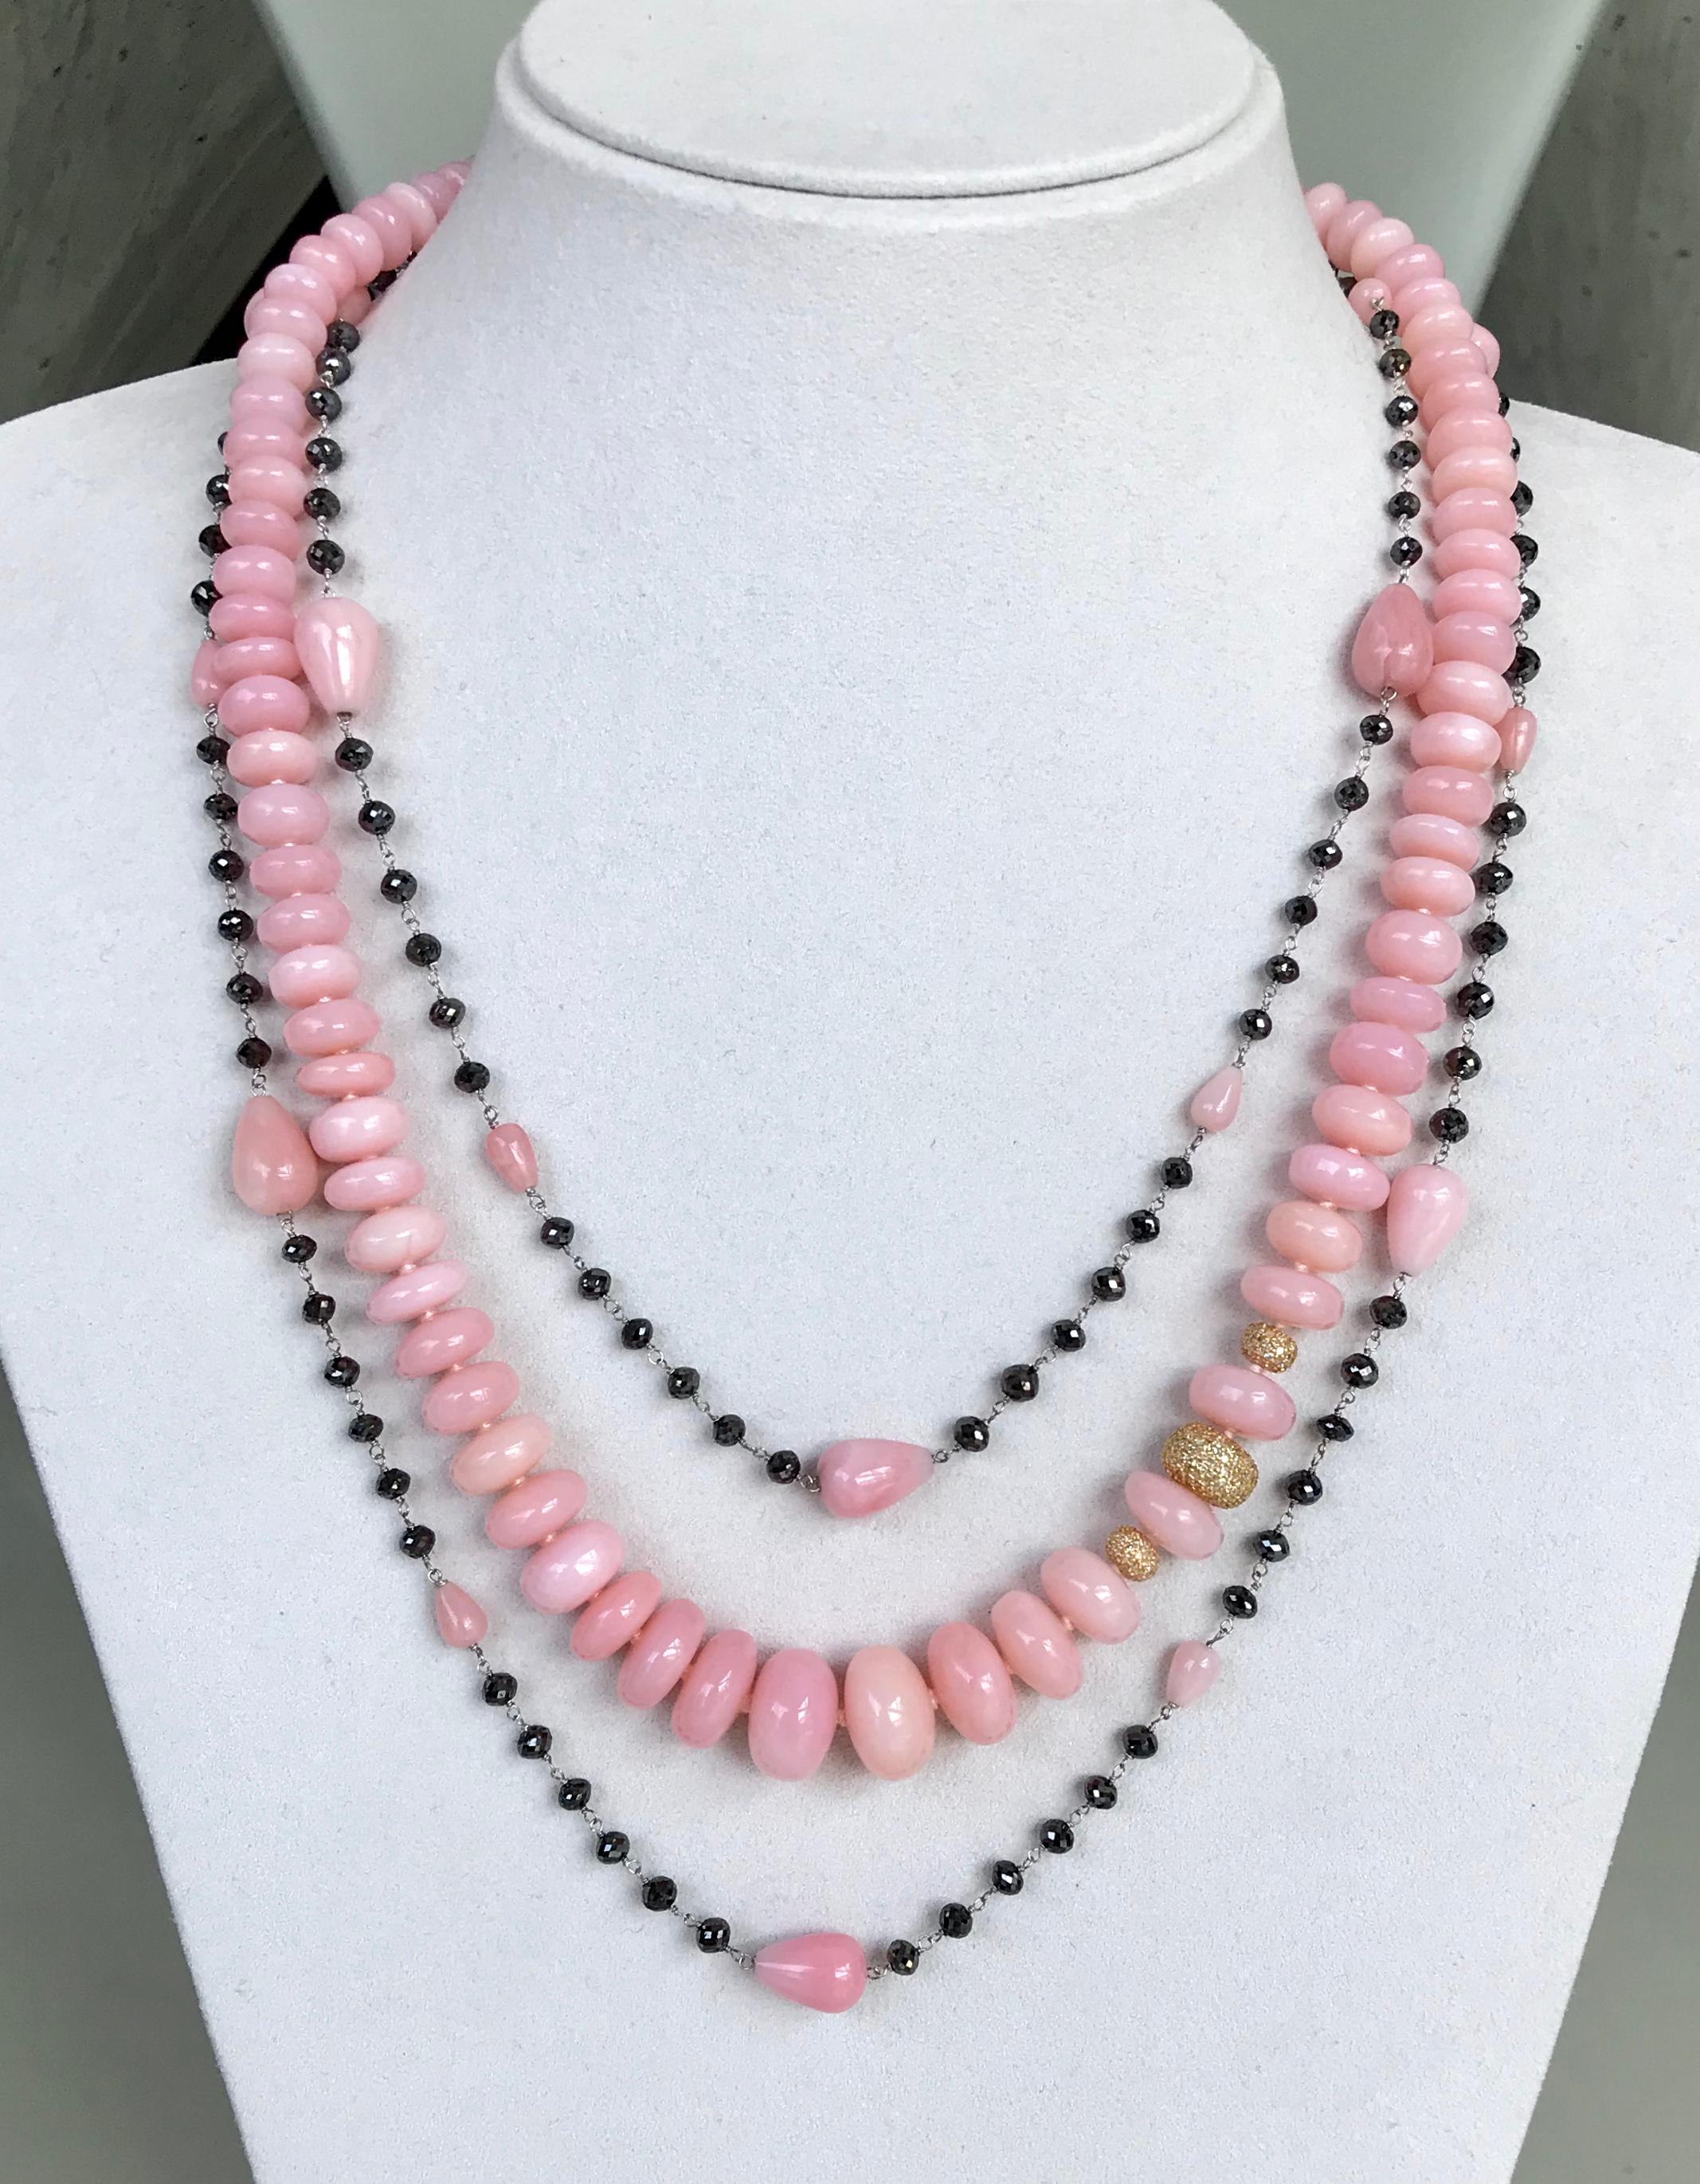 This JOON HAN one-of-a-kind white gold chain necklace is sprinkled with special order fancy cut pink opal cabochons and black diamond beads. Beautiful worn alone or layered with other necklaces, it can also be worn long or doubled-up. Definitely an